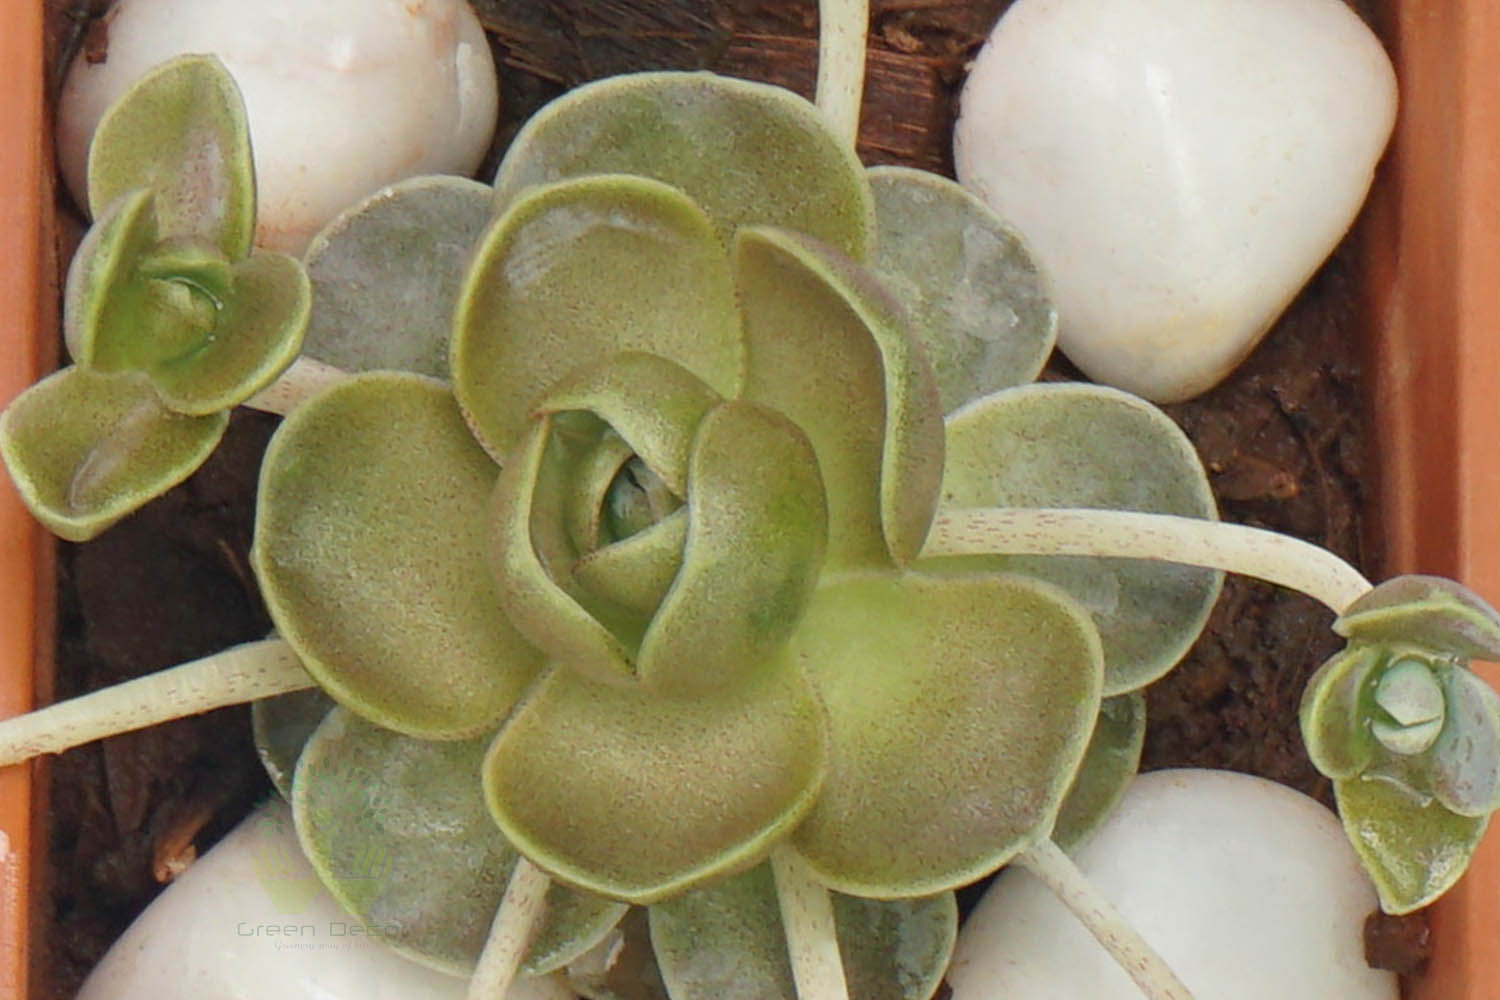 Buy Echeveria Imbricata Plant Leaves View, White Pots and Seeds in Delhi NCR by the best online nursery shop Greendecor.